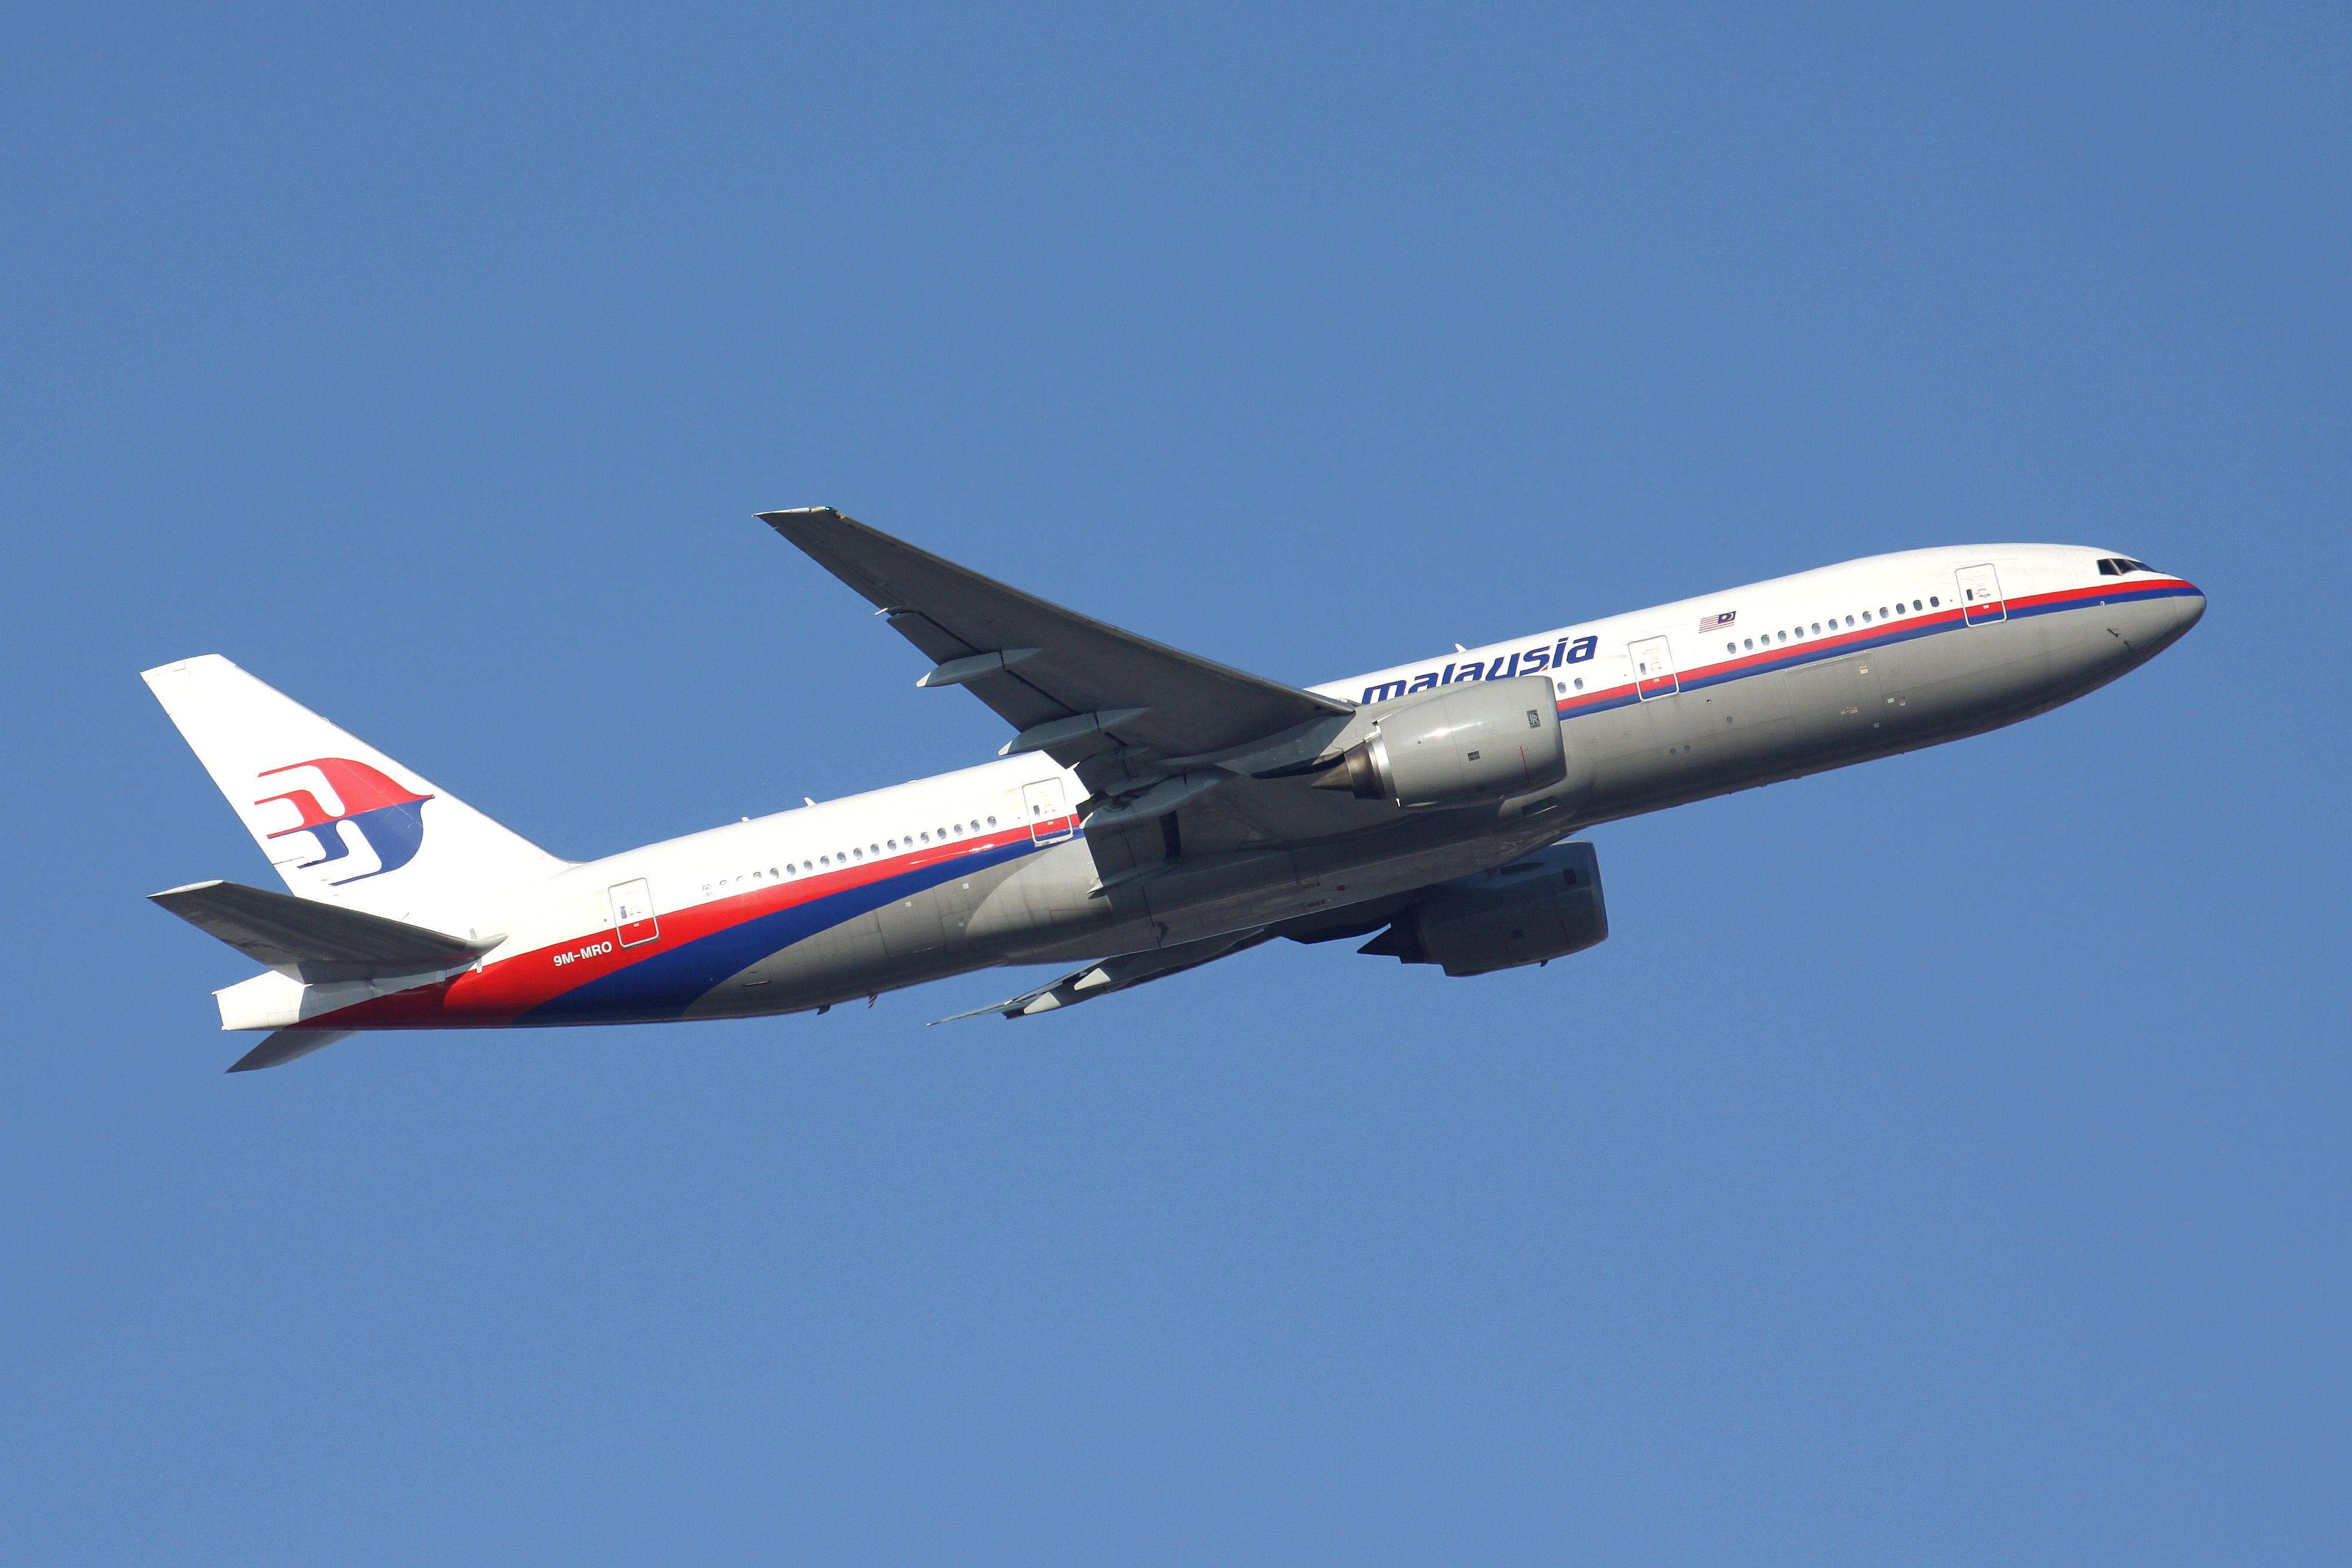 A Malaysia Airlines Boeing 777 Flying in the sky.